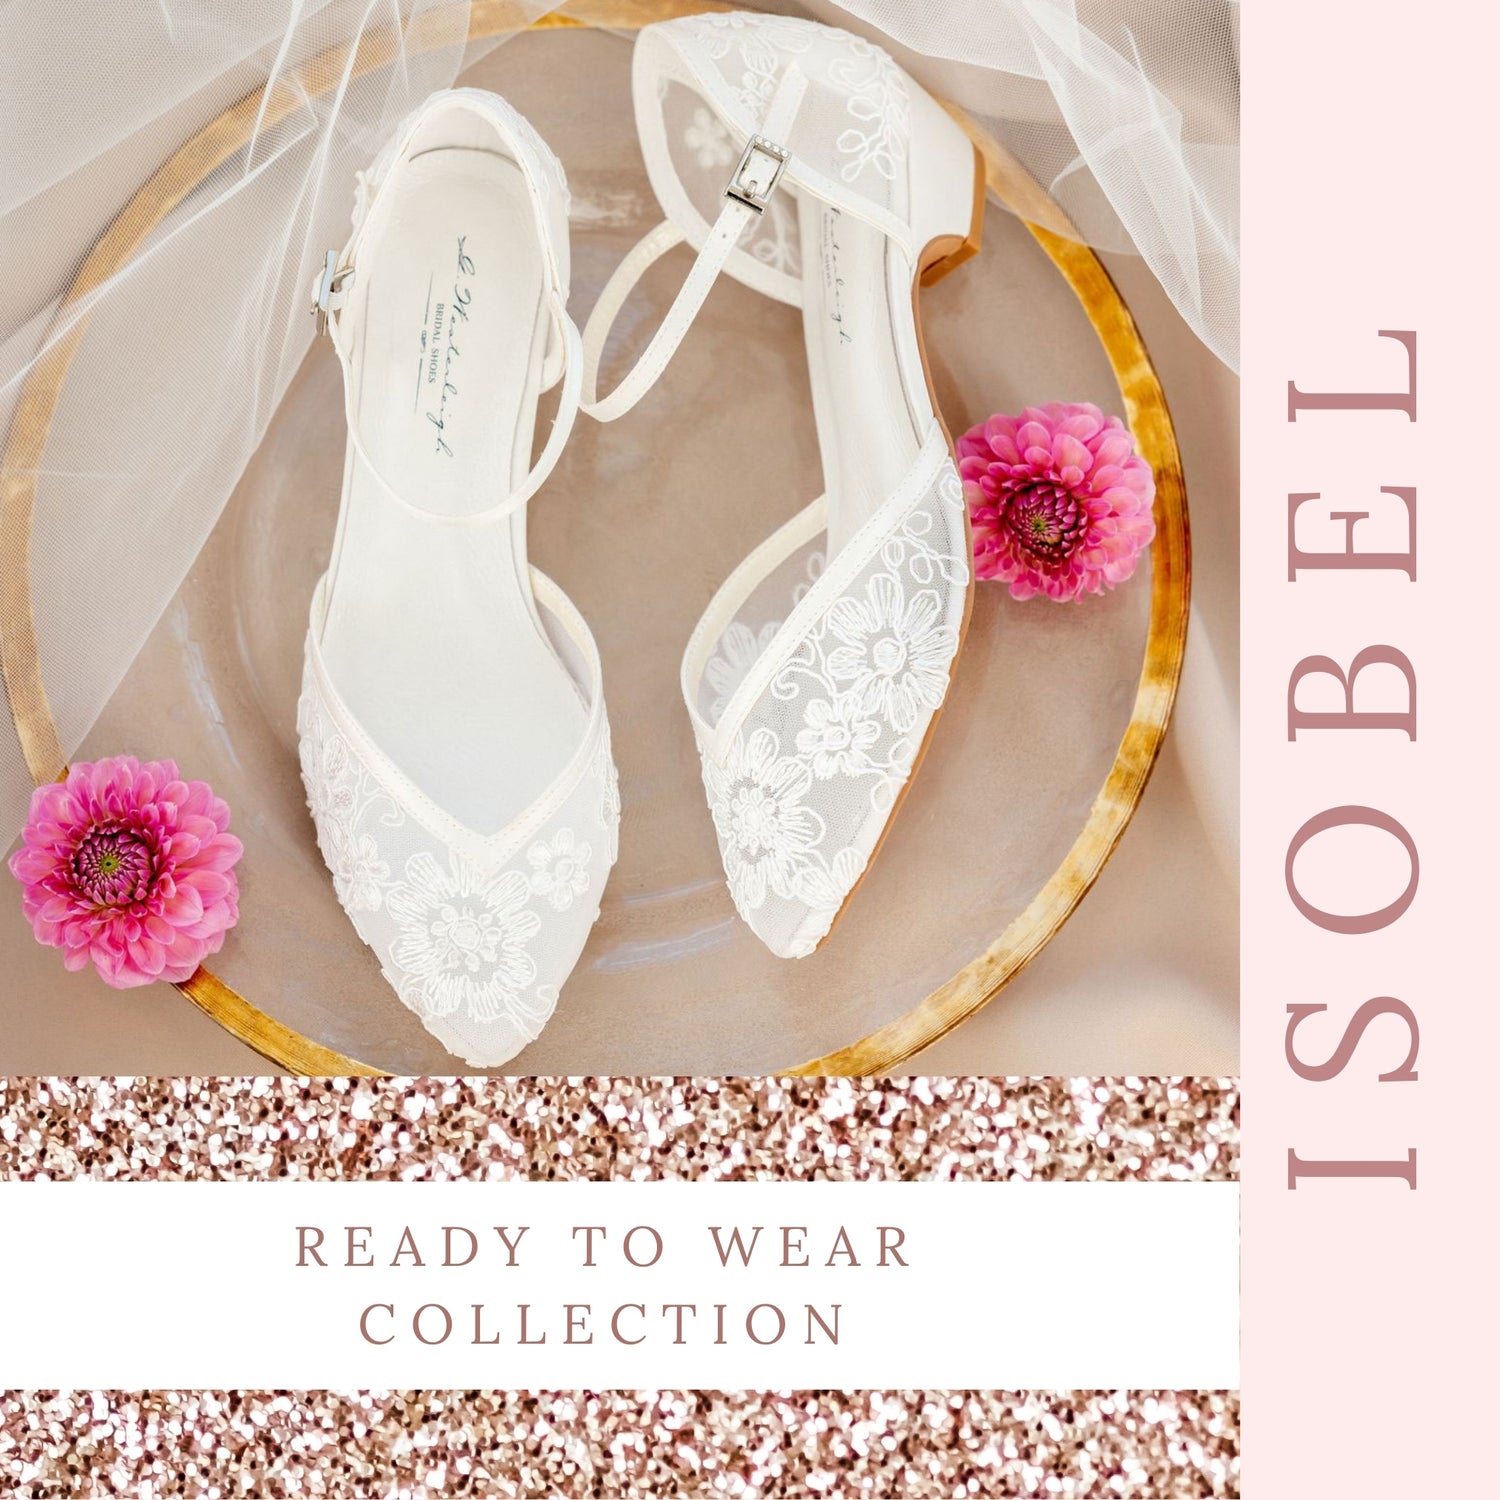 lace-closed-toe-wedding-shoes